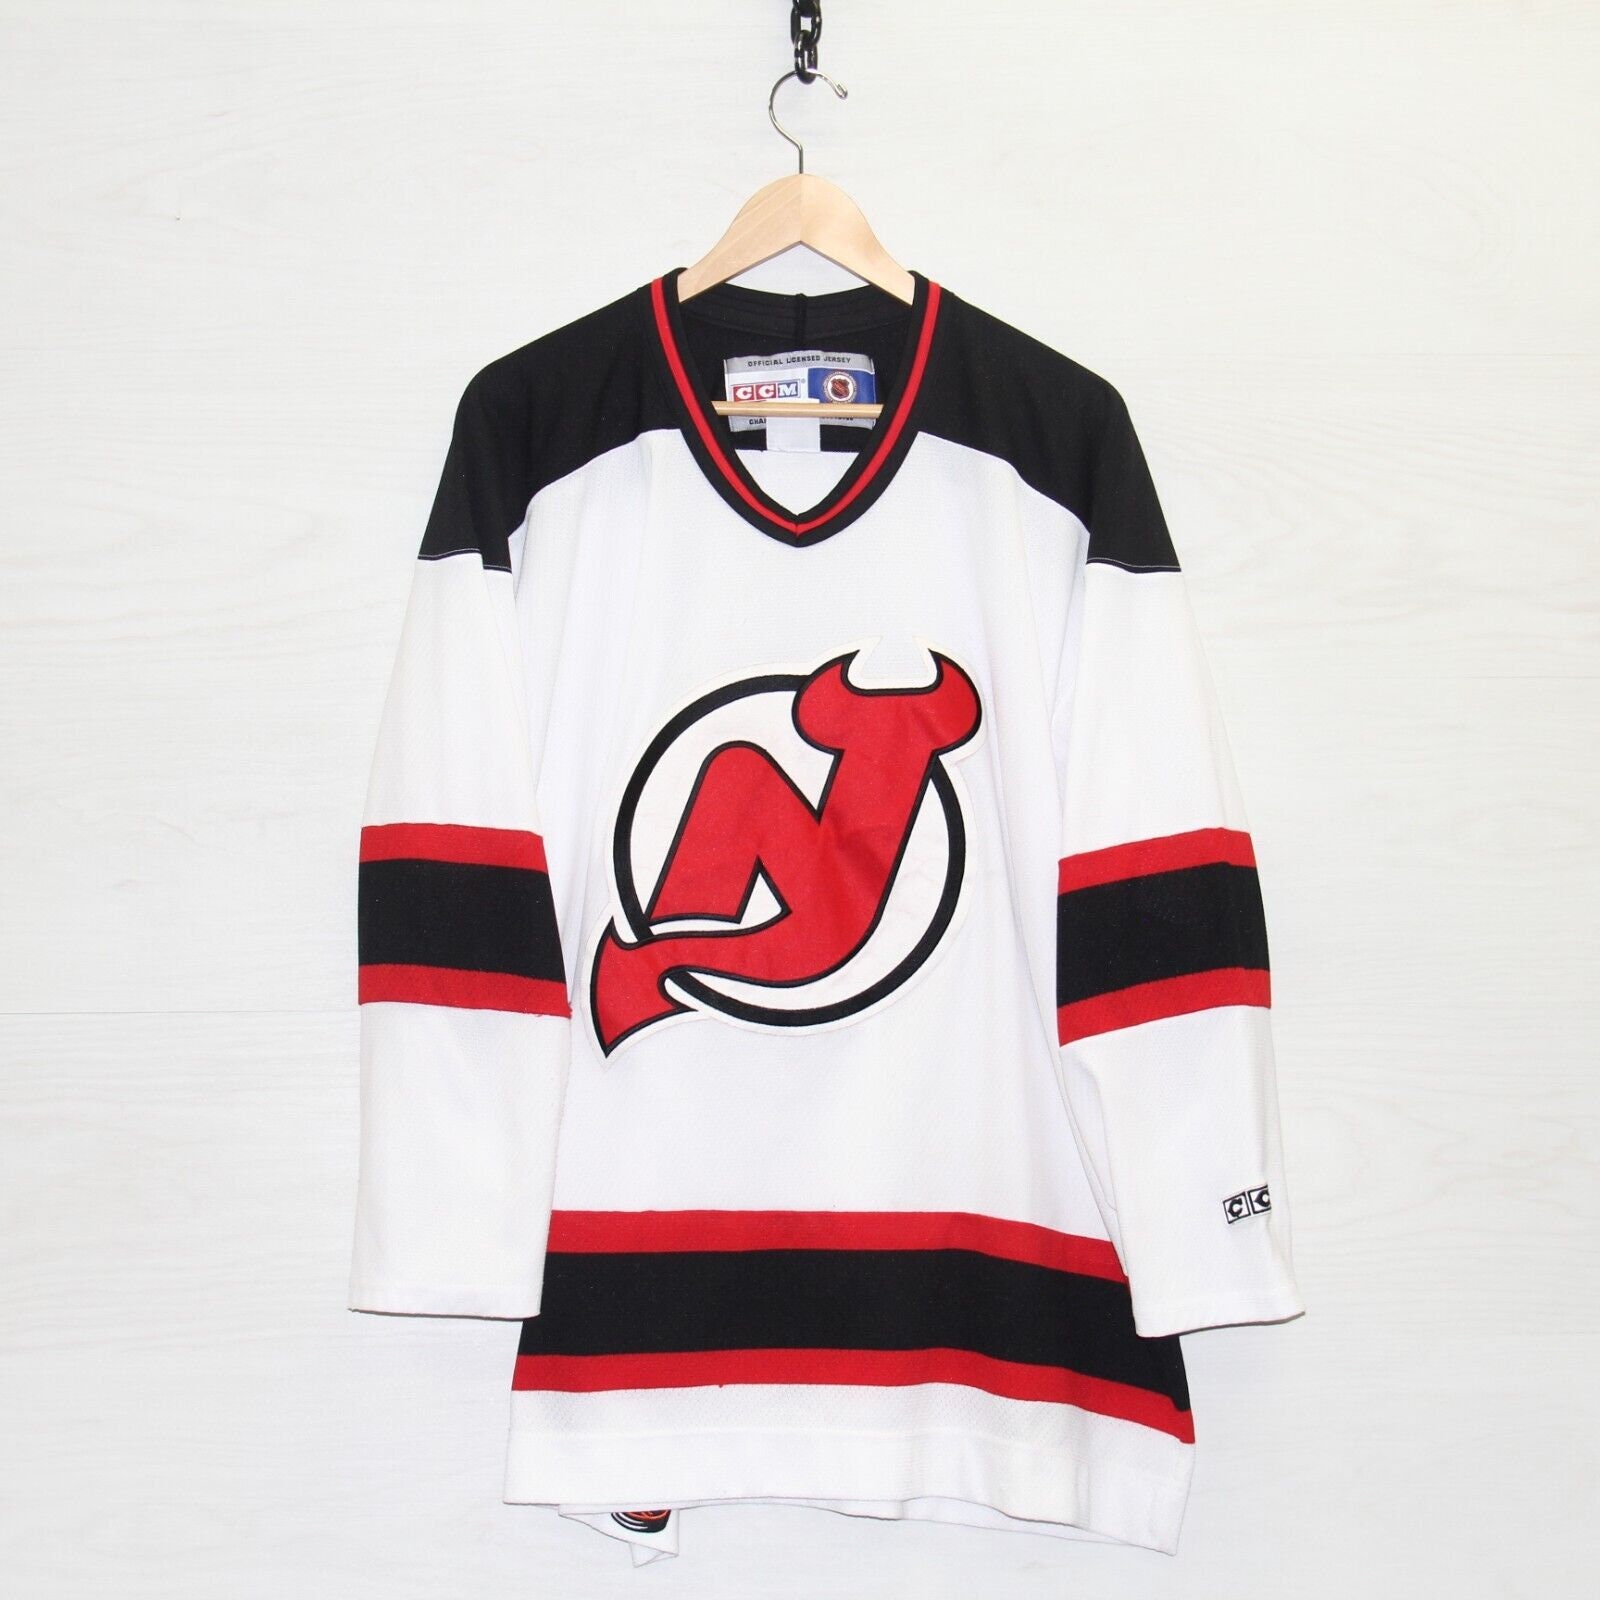 Claude Lemieux 1995 New Jersey Devils Home Throwback NHL Hockey Jersey